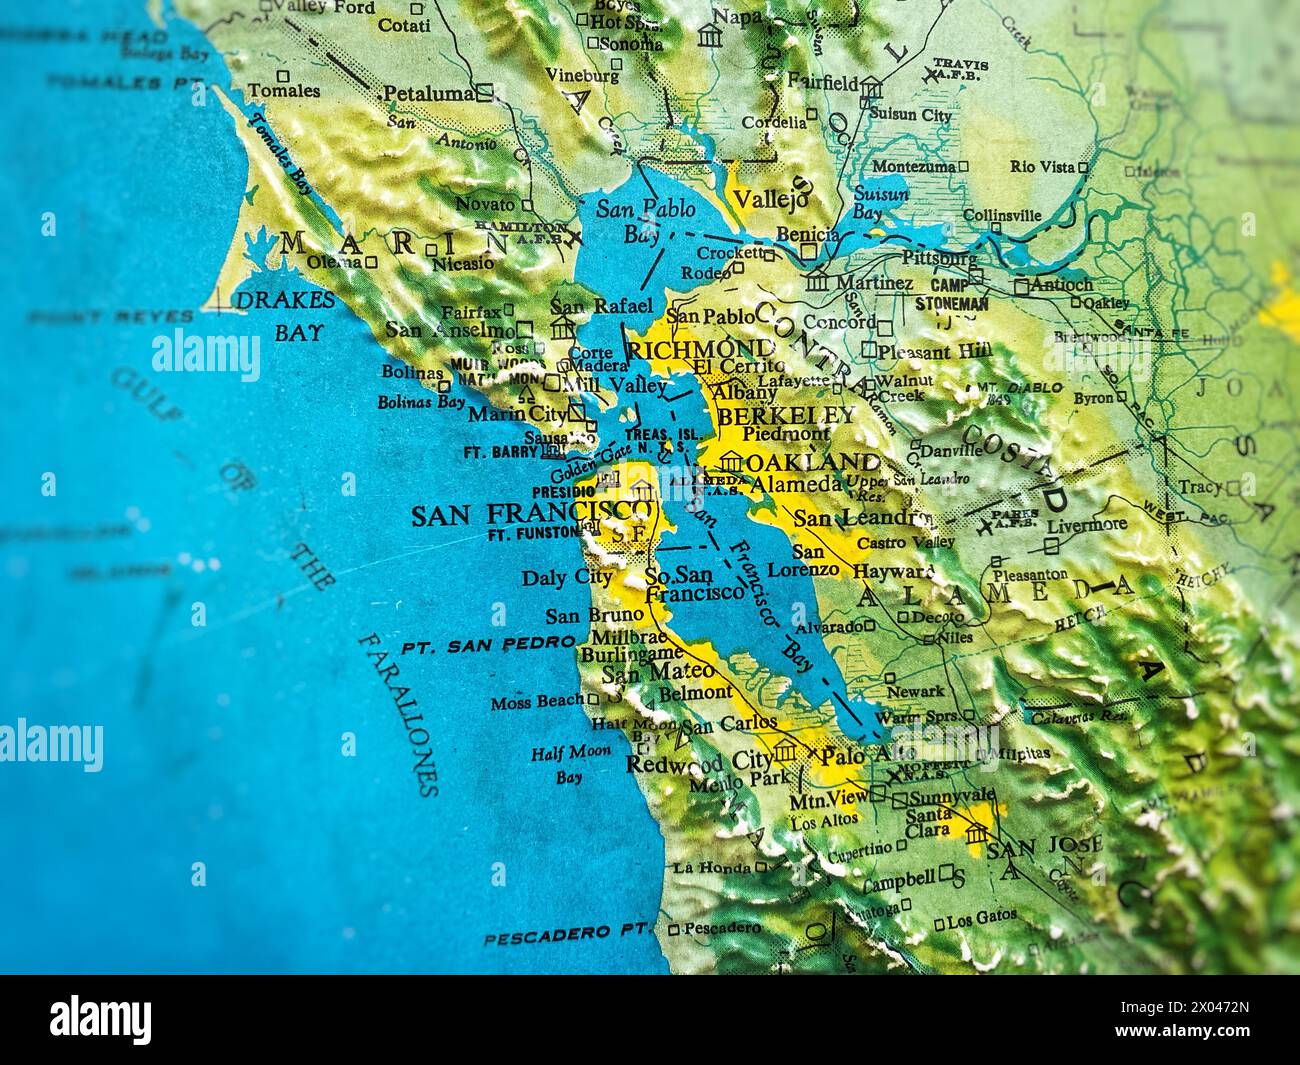 Map of San Francisco and the Bay Area of California, retro vintage raised-relief map of northern California, United States Stock Photo